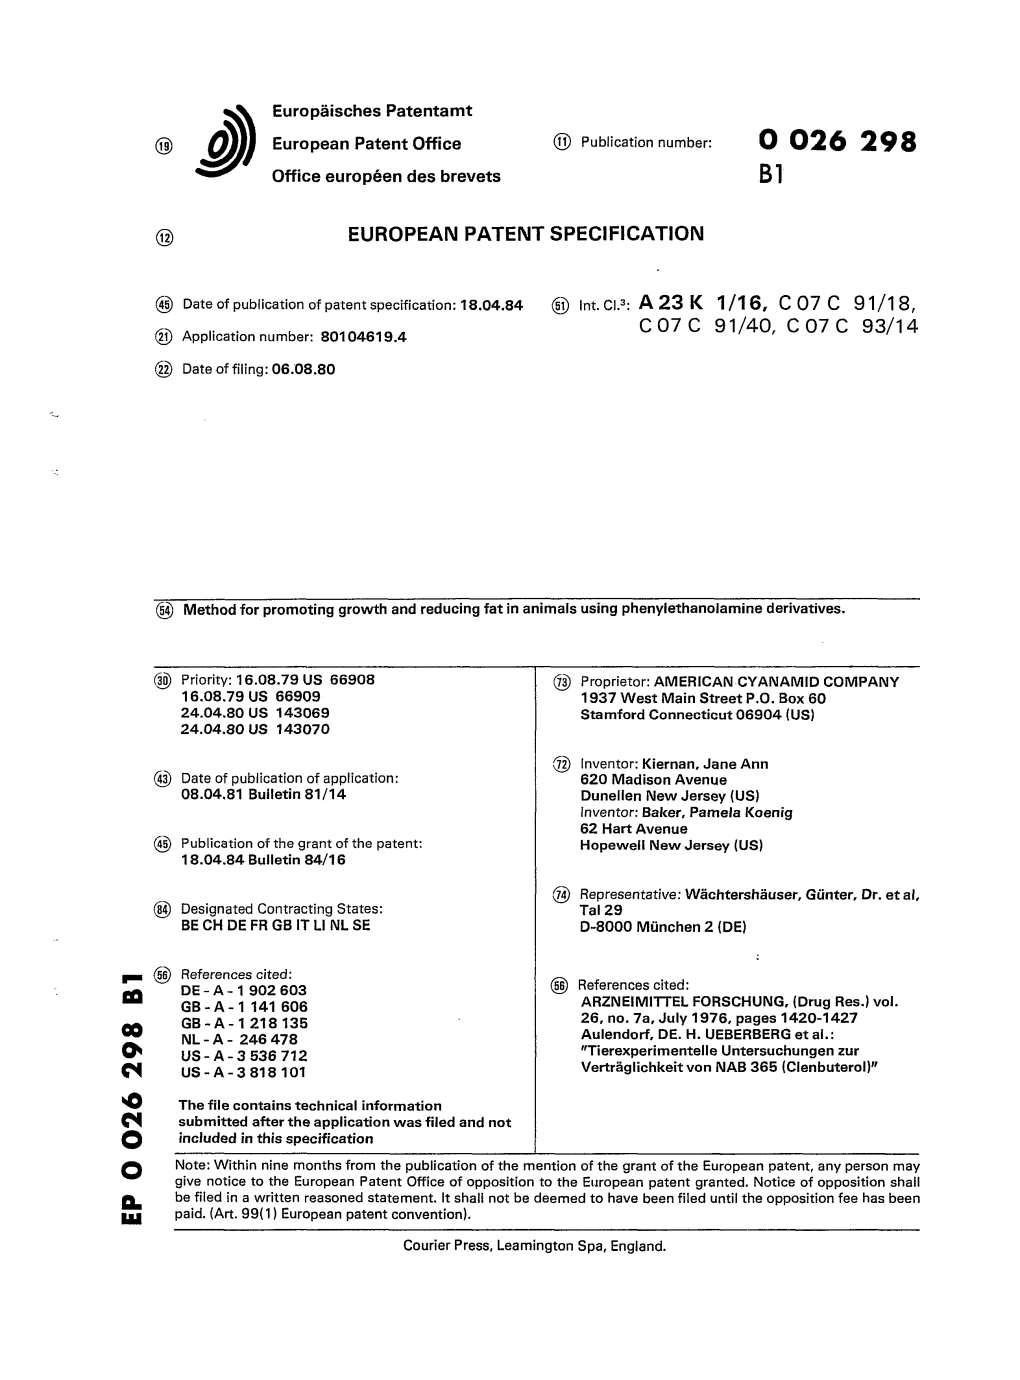 Method for Promoting Growth and Reducing Fat in Animals Using Phenylethanolamine Derivatives